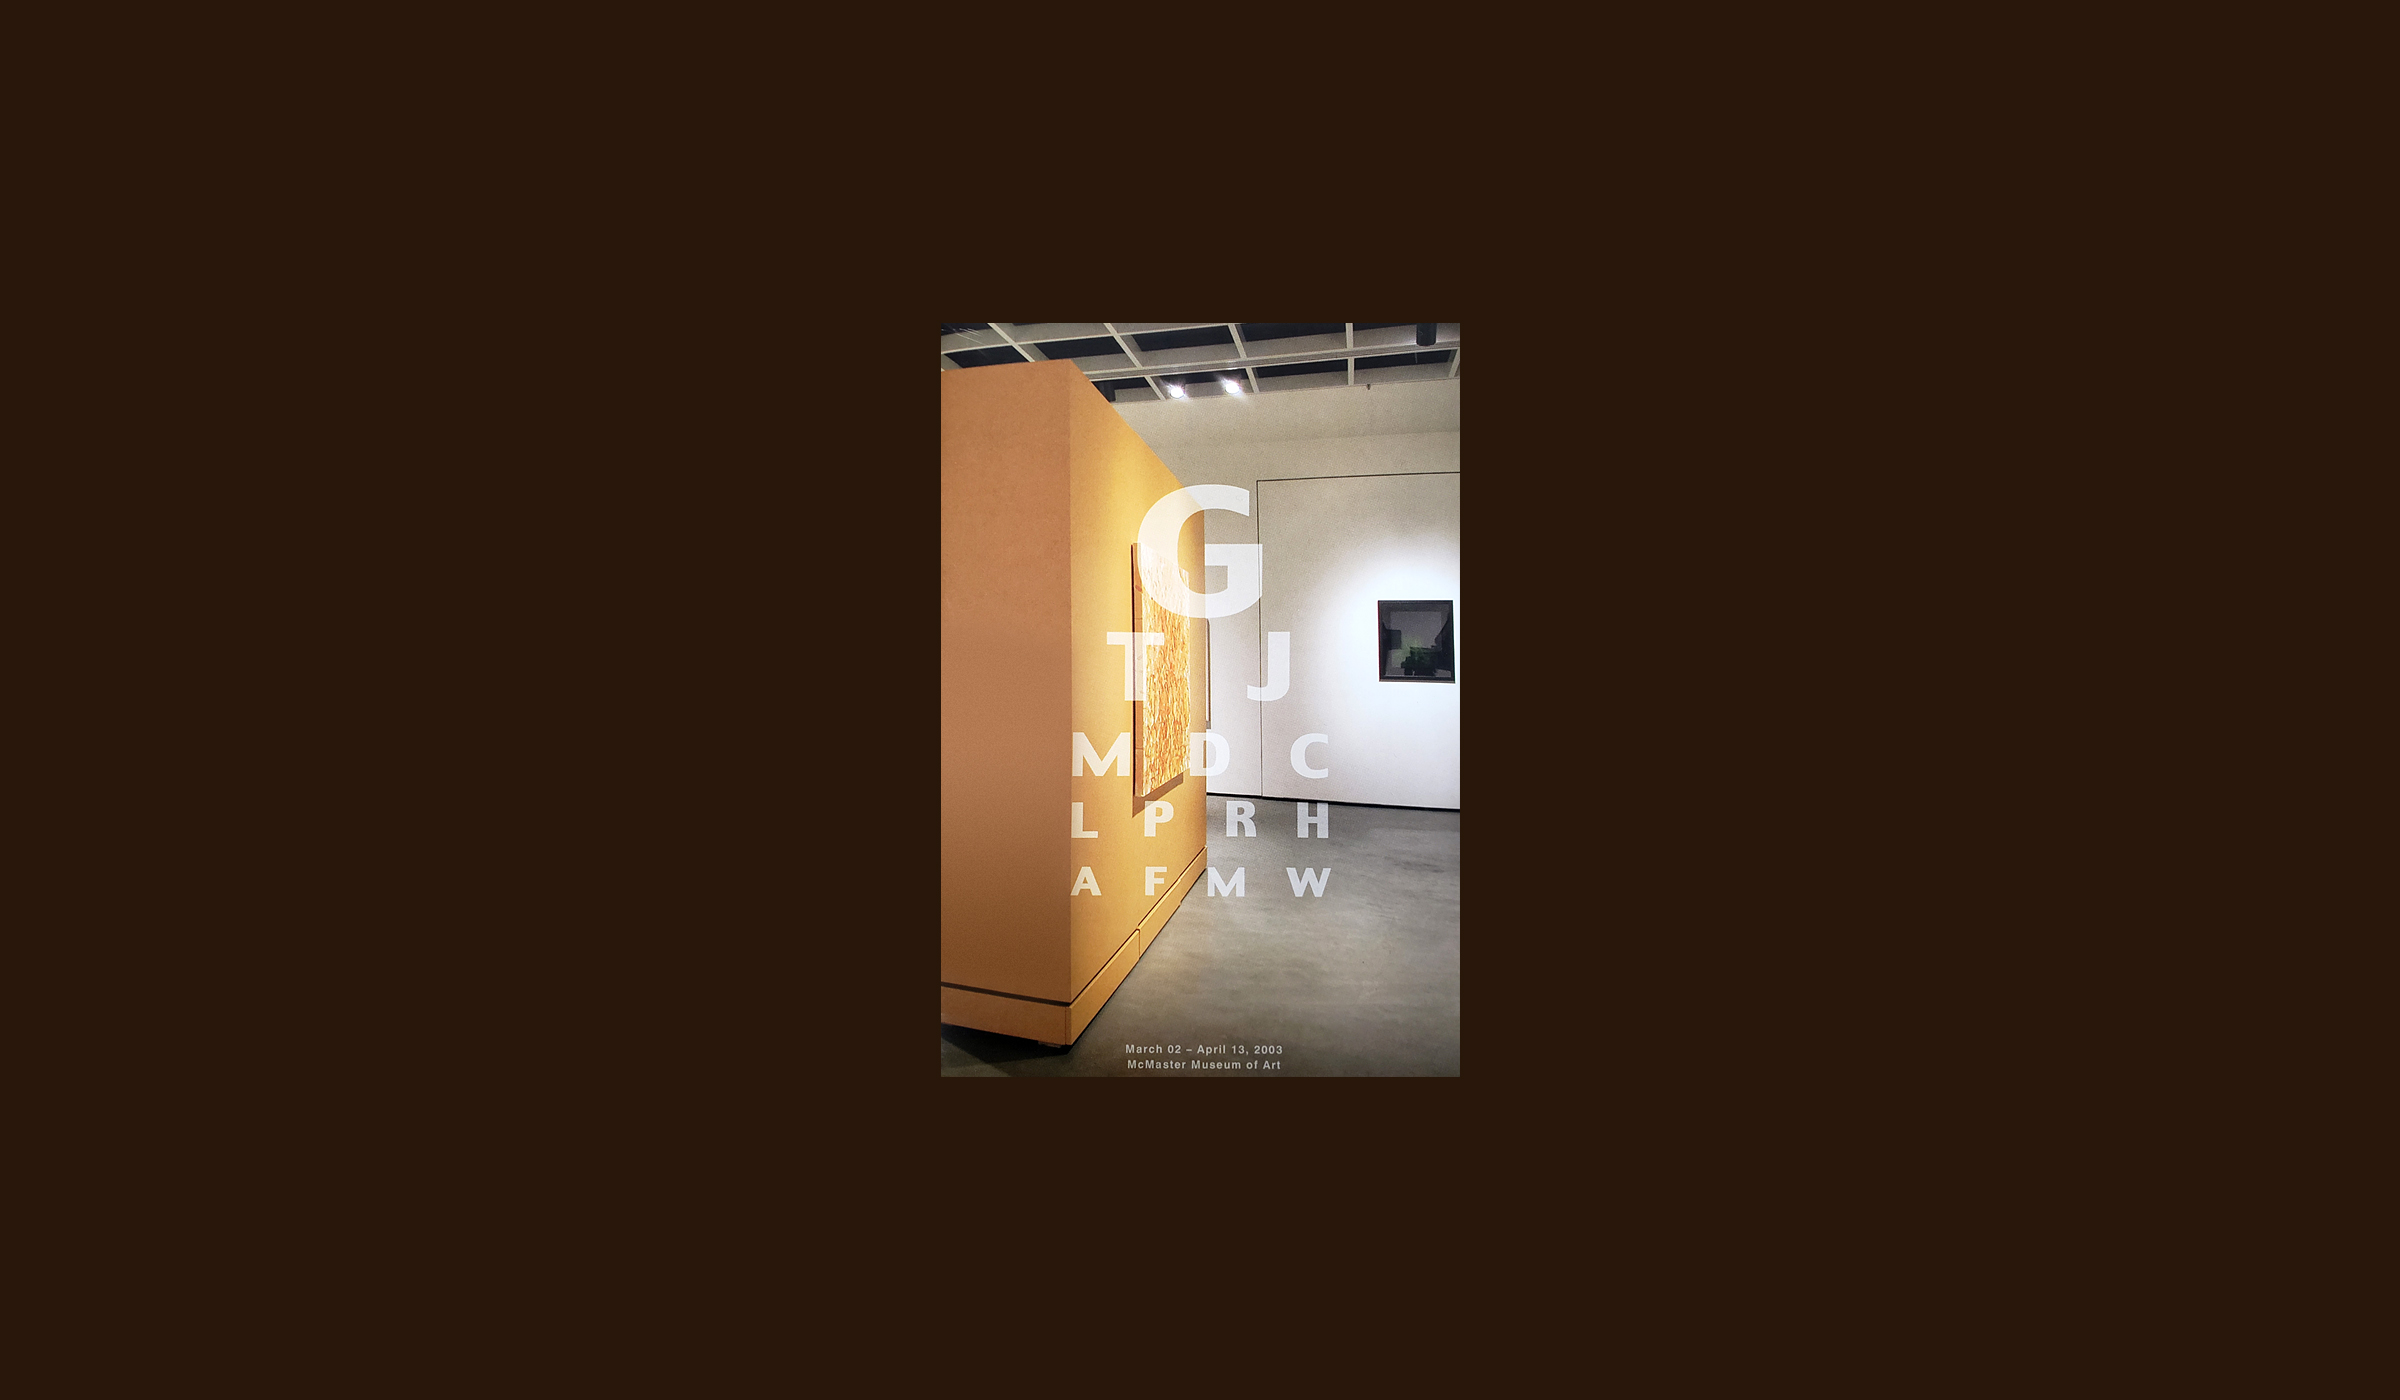 Book cover with image of gallery space